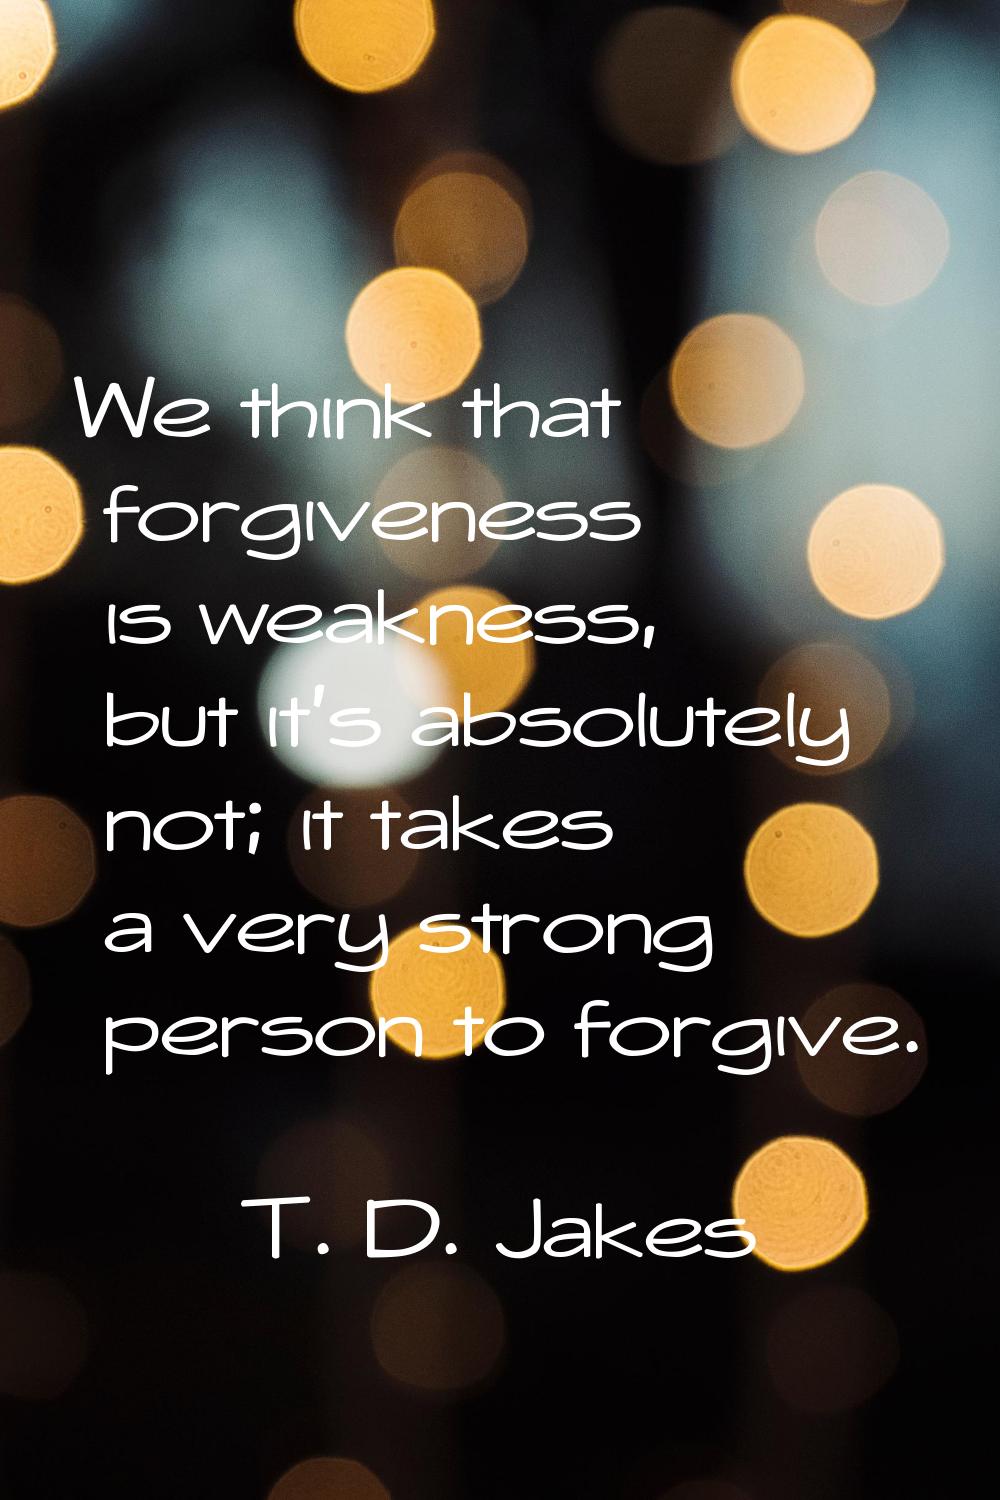 We think that forgiveness is weakness, but it's absolutely not; it takes a very strong person to fo